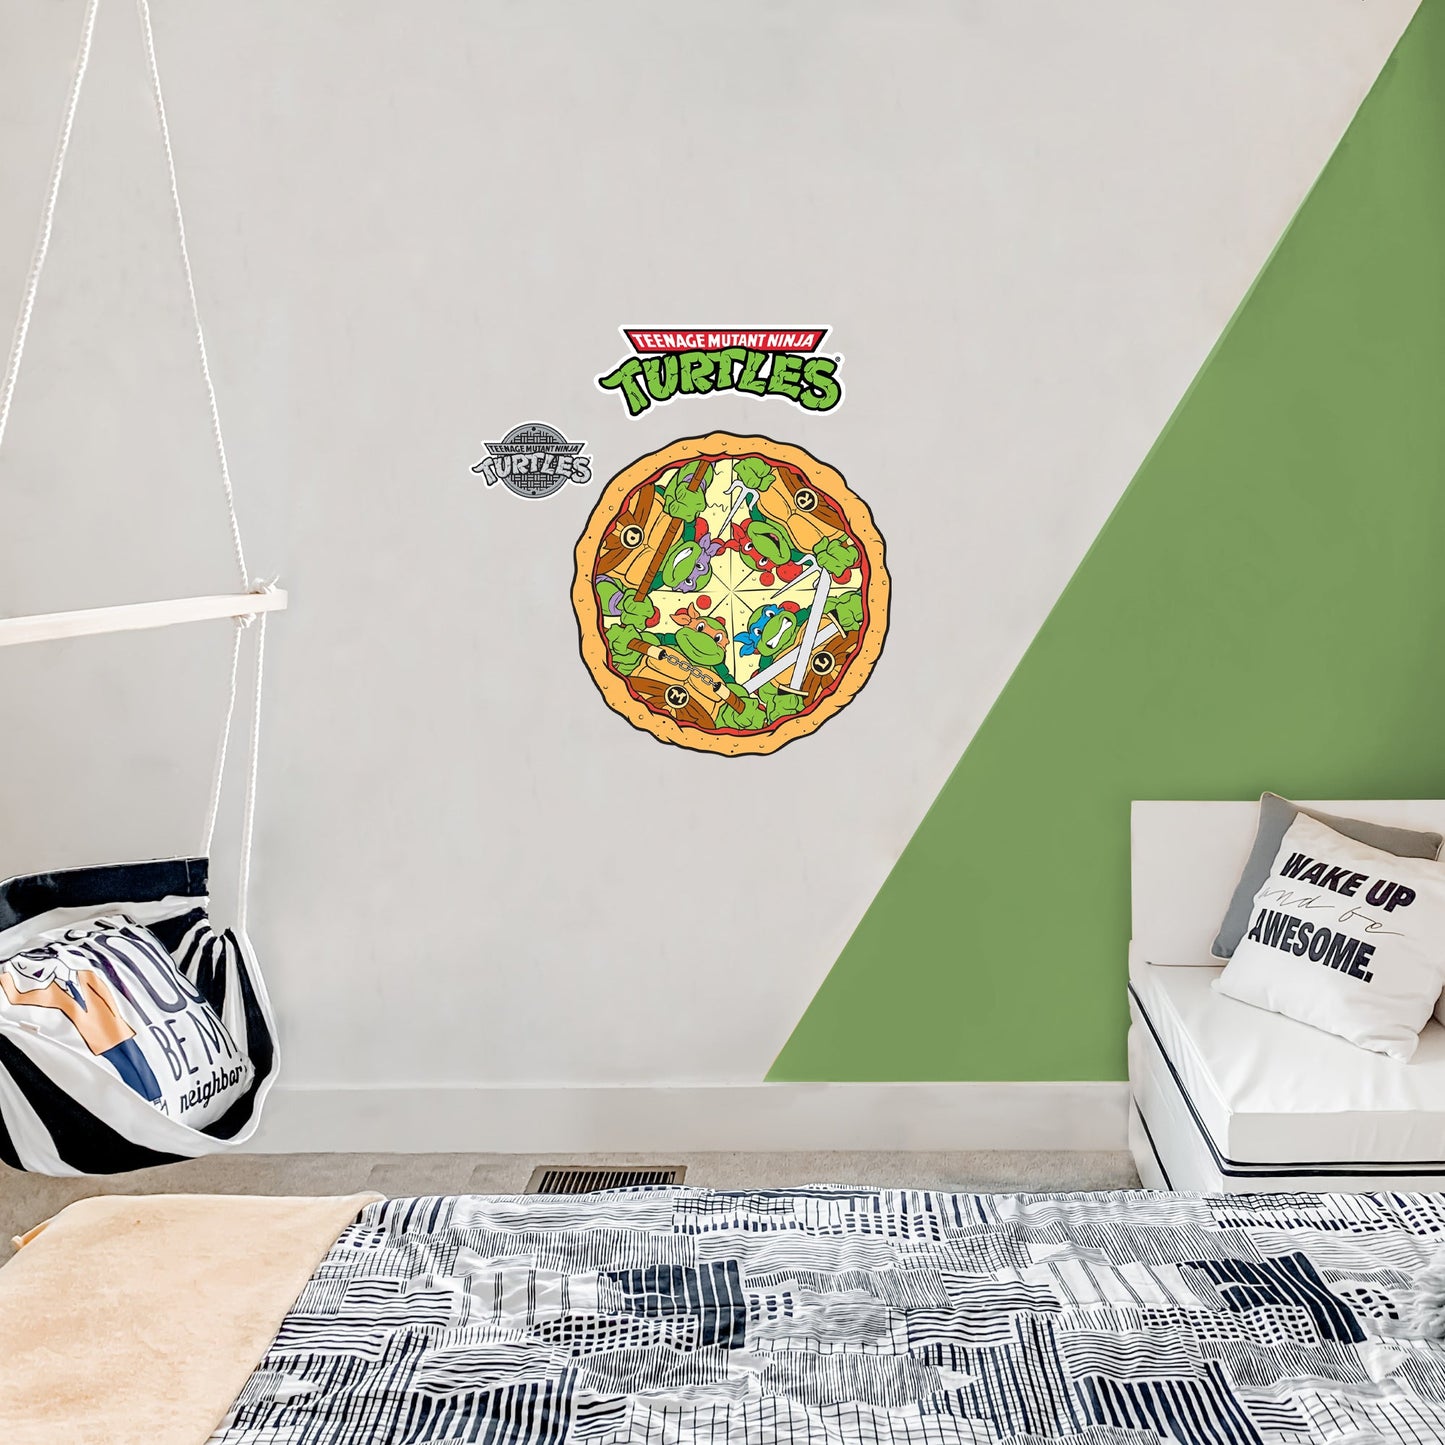 Teenage Mutant Ninja Turtles: Pizza Icon Die-Cut Icon - Officially Licensed Nickelodeon Removable Adhesive Decal